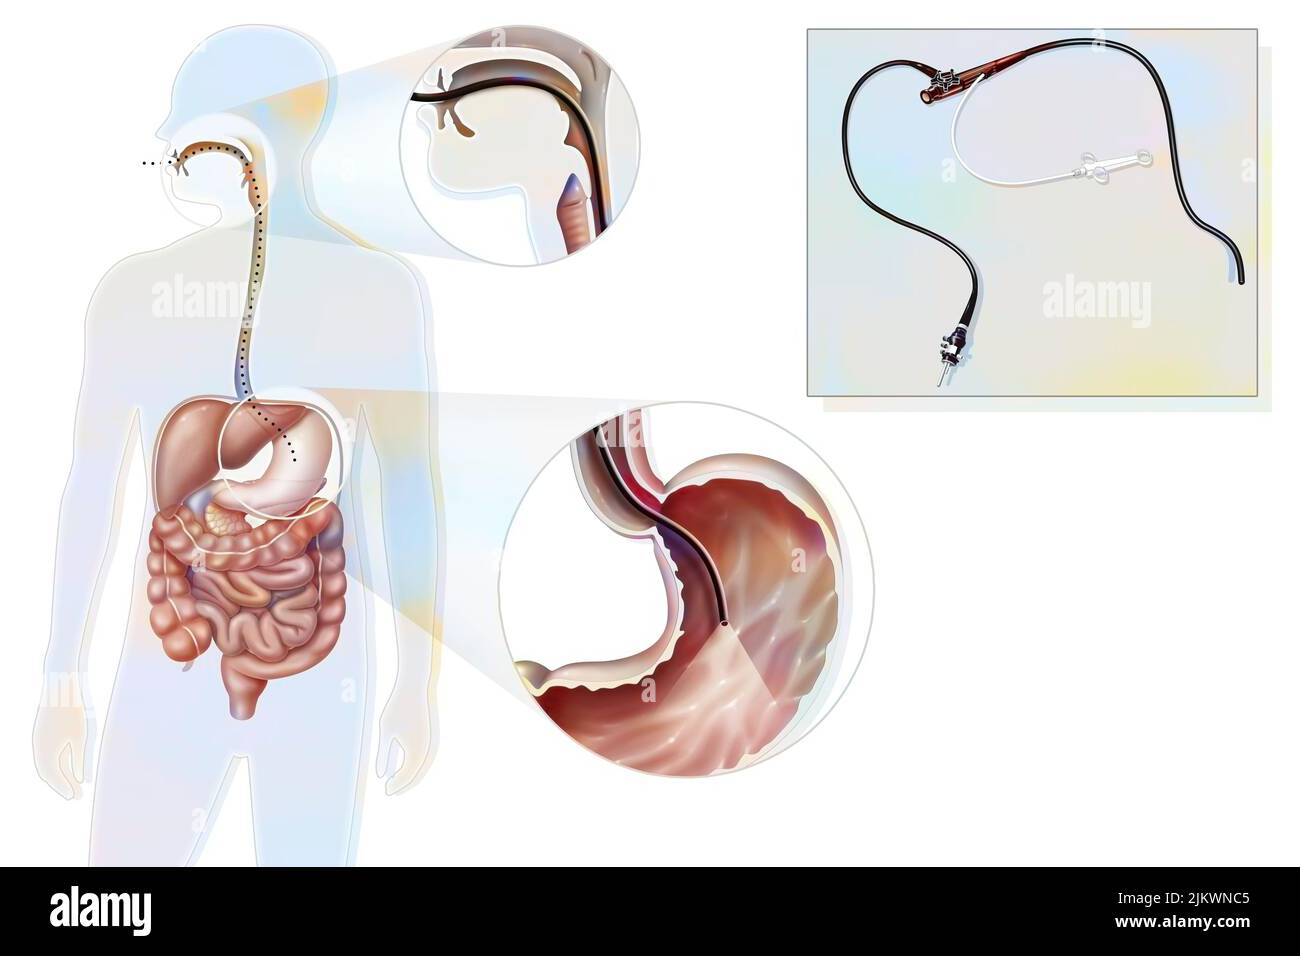 Gastroscopy: route and location of the gastro fiberscope introduced through the mouth. Stock Photo